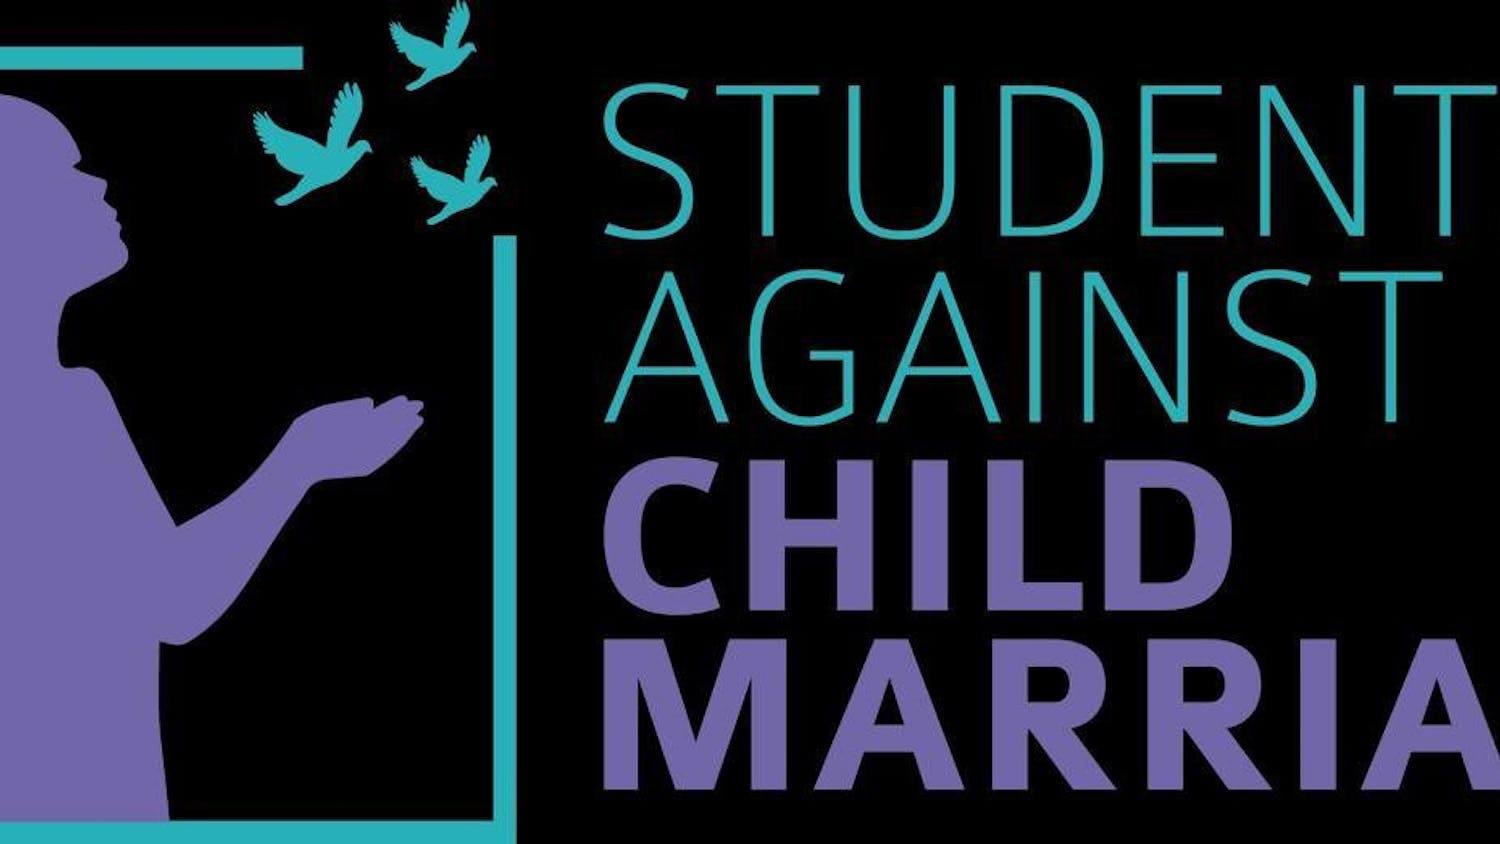 Students Against Child Marriage logo.jpg